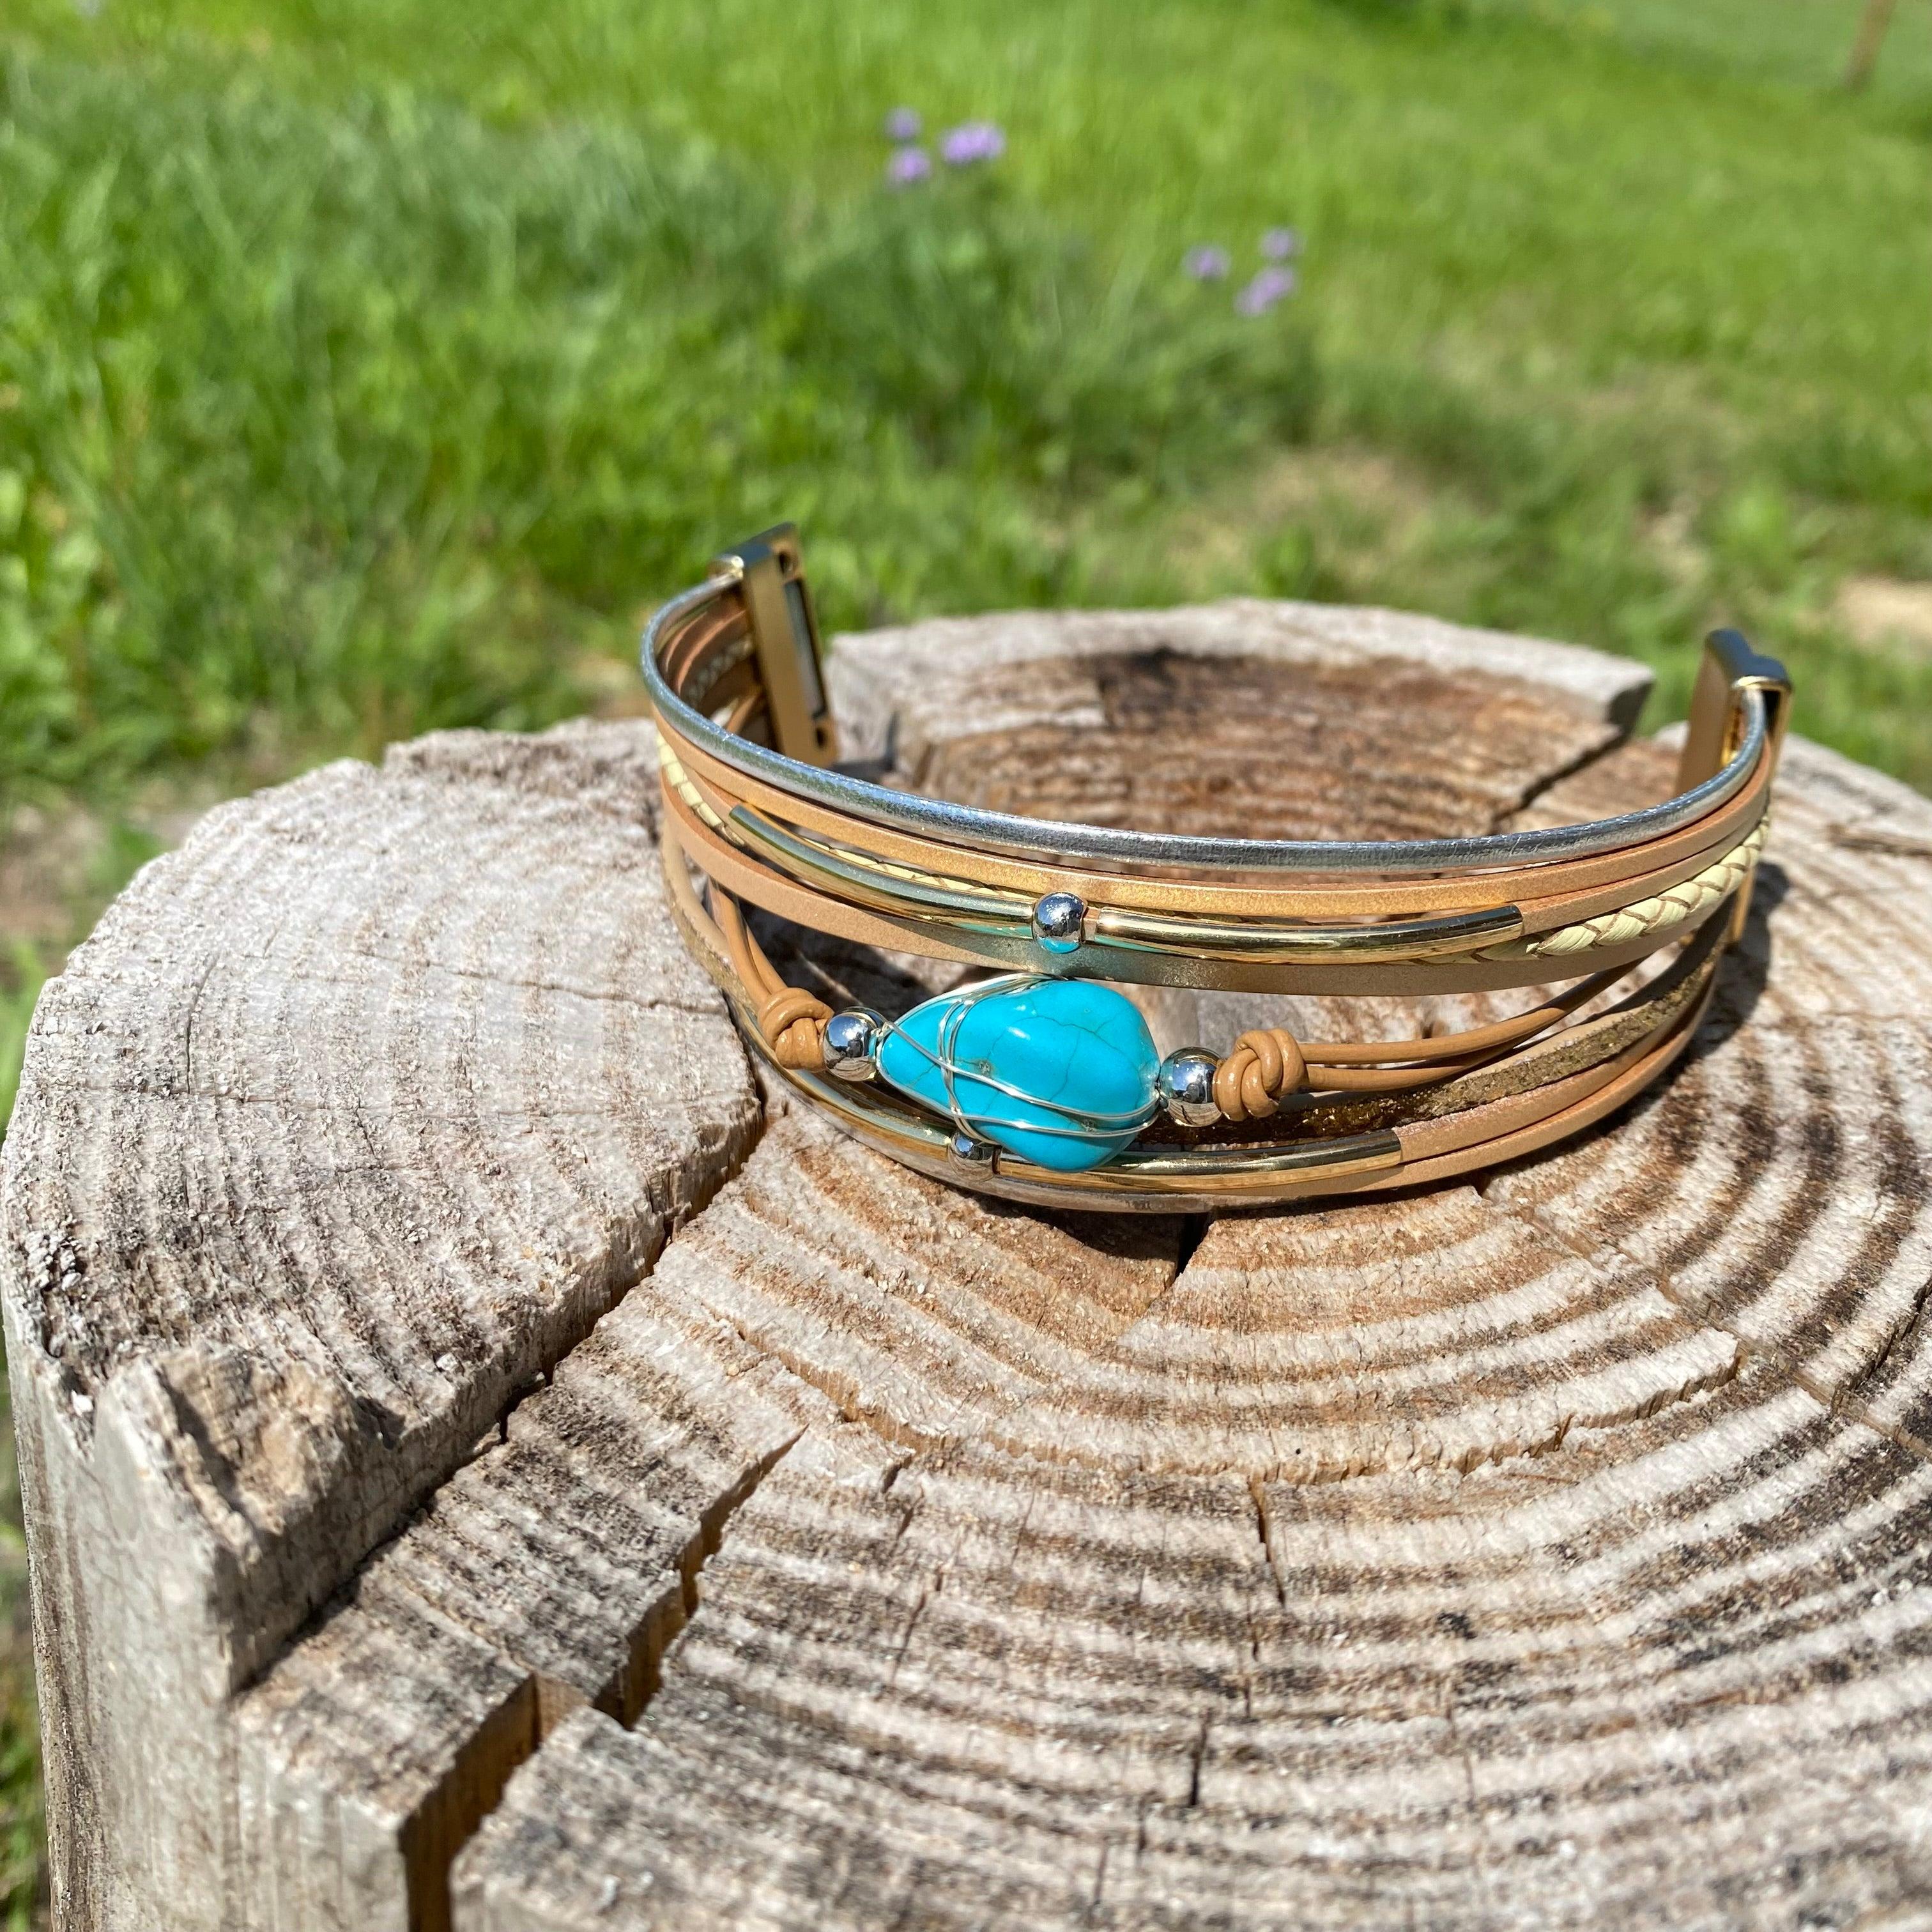 Tan Leather and Turquoise Stone Fashion Bracelet XI116 - RODEO DRIVE